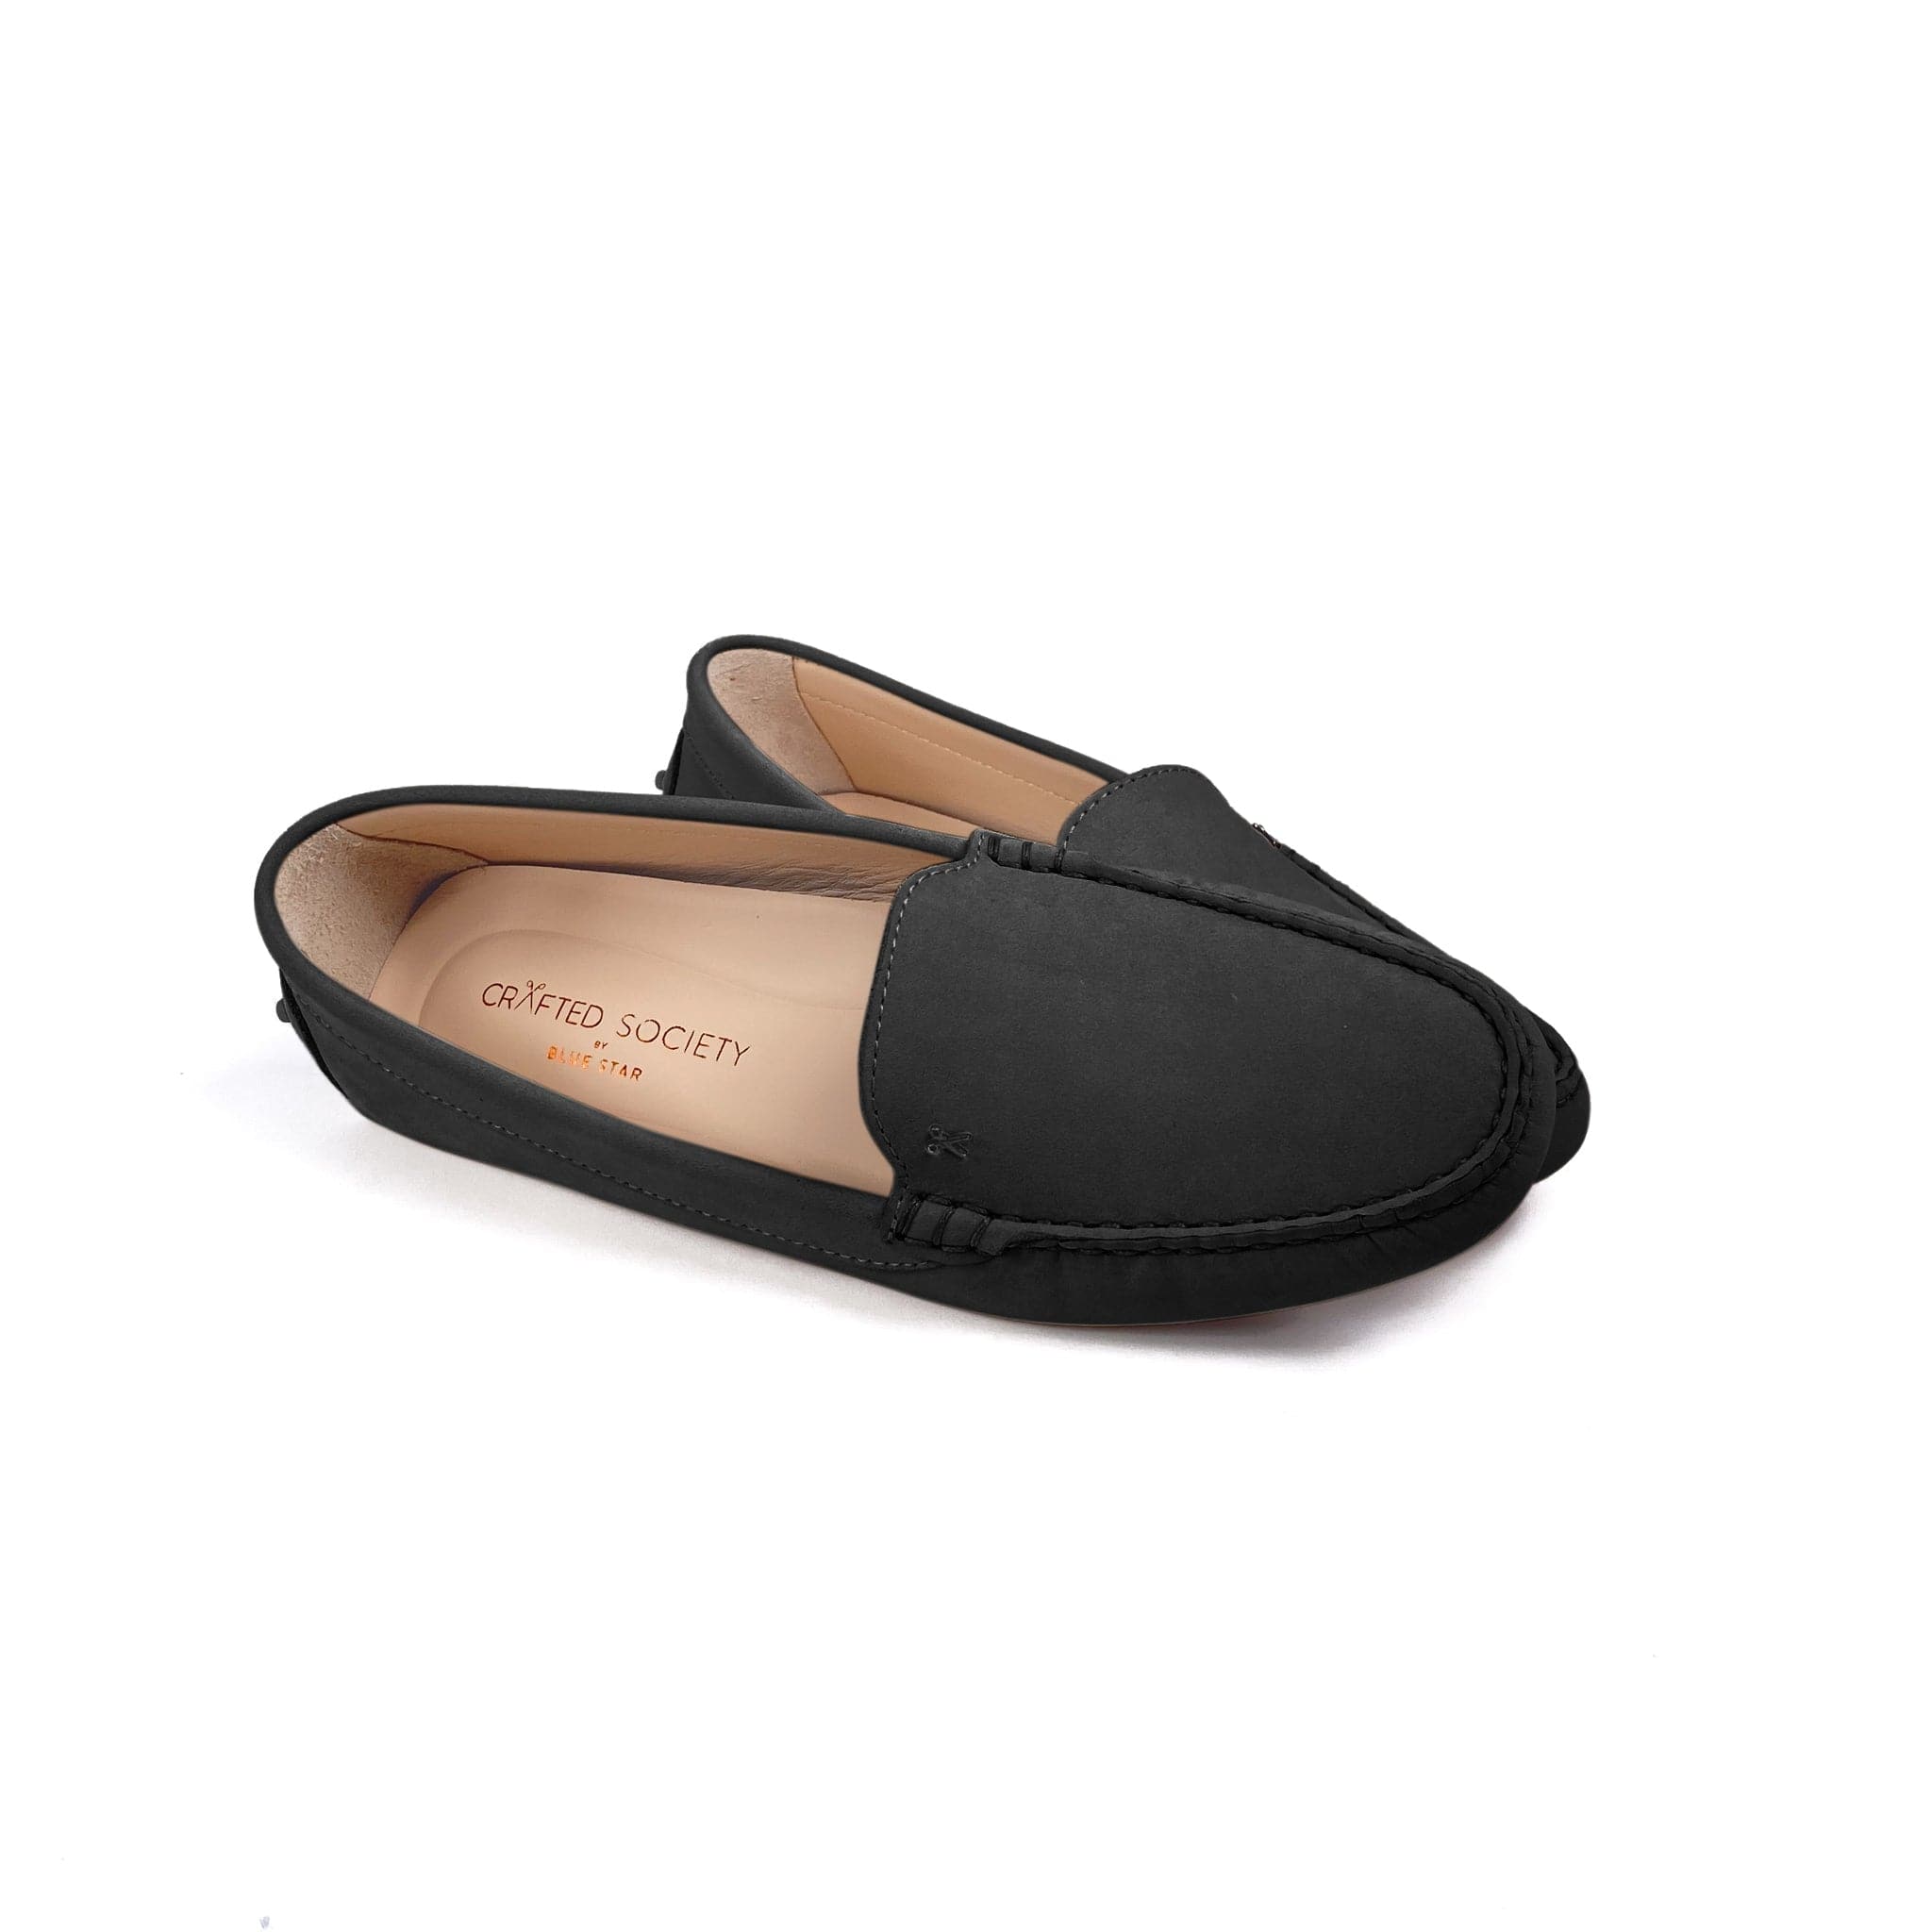 Driving shoe or moccasin in black italian nubuck leather with tan coloured calfskin lining. It has the iconic scissor on the right side of the vamp showing the front and inside on a white background